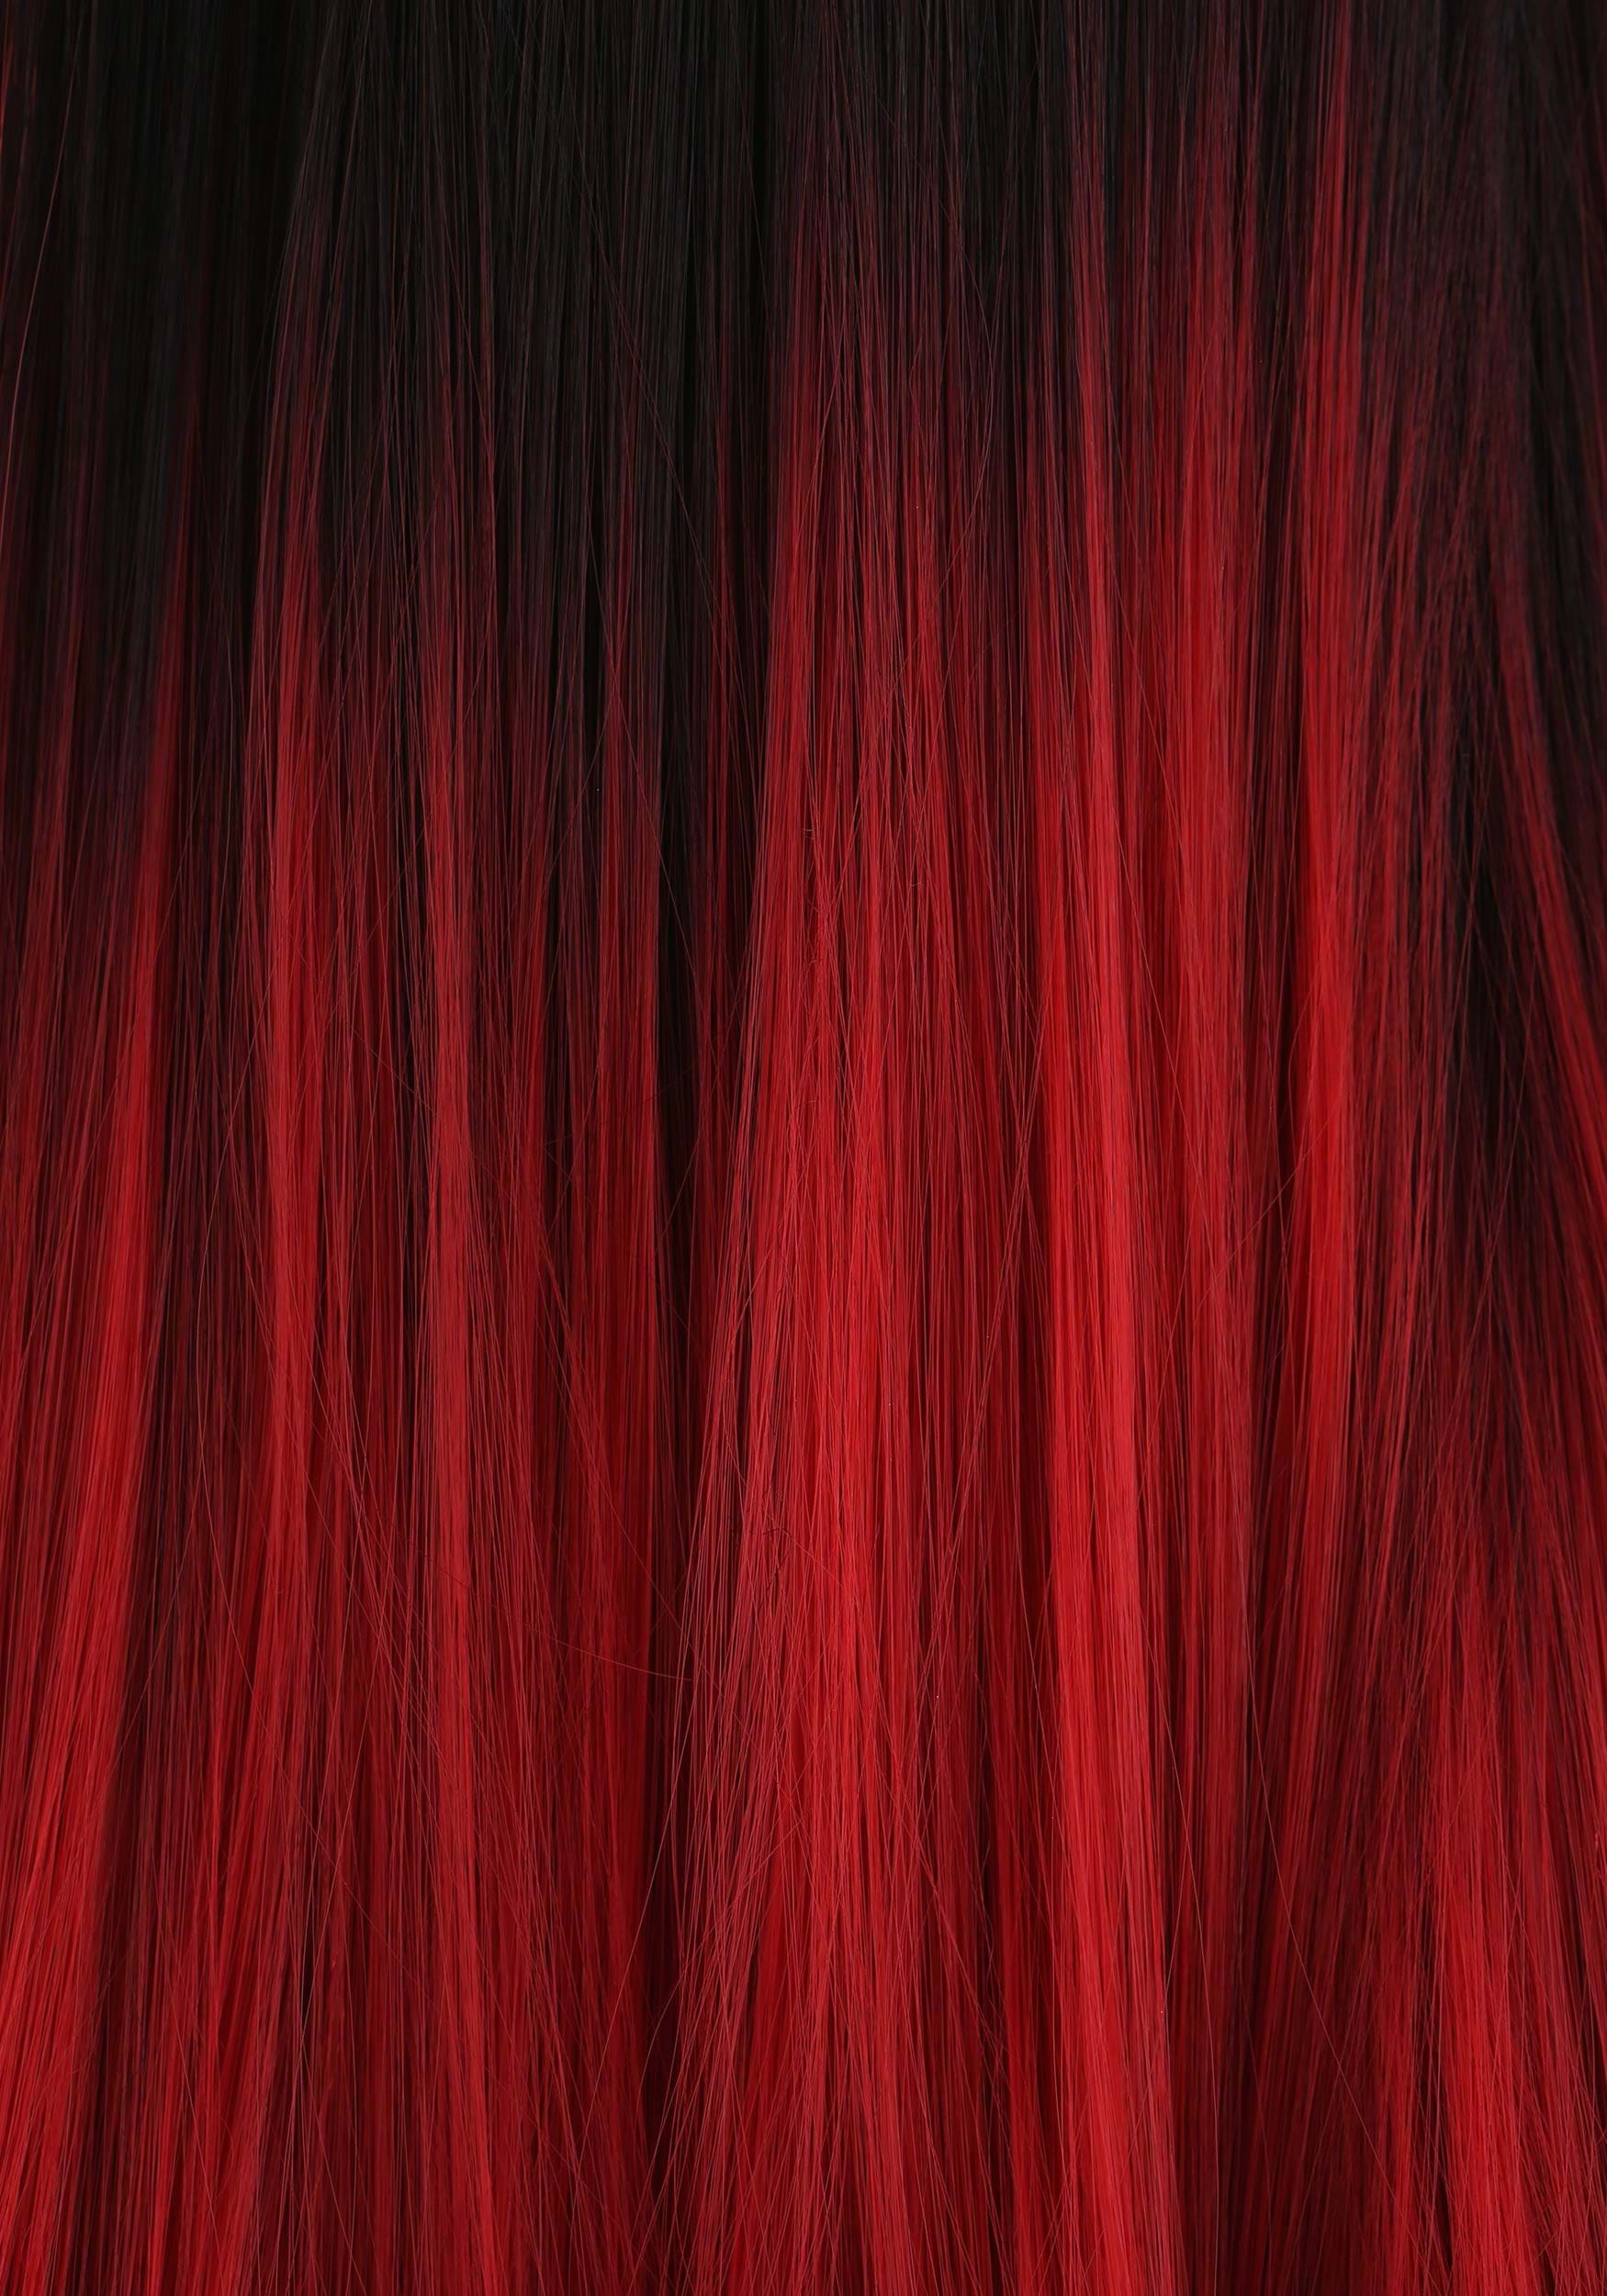 Black and Red Ombre Adult Wig